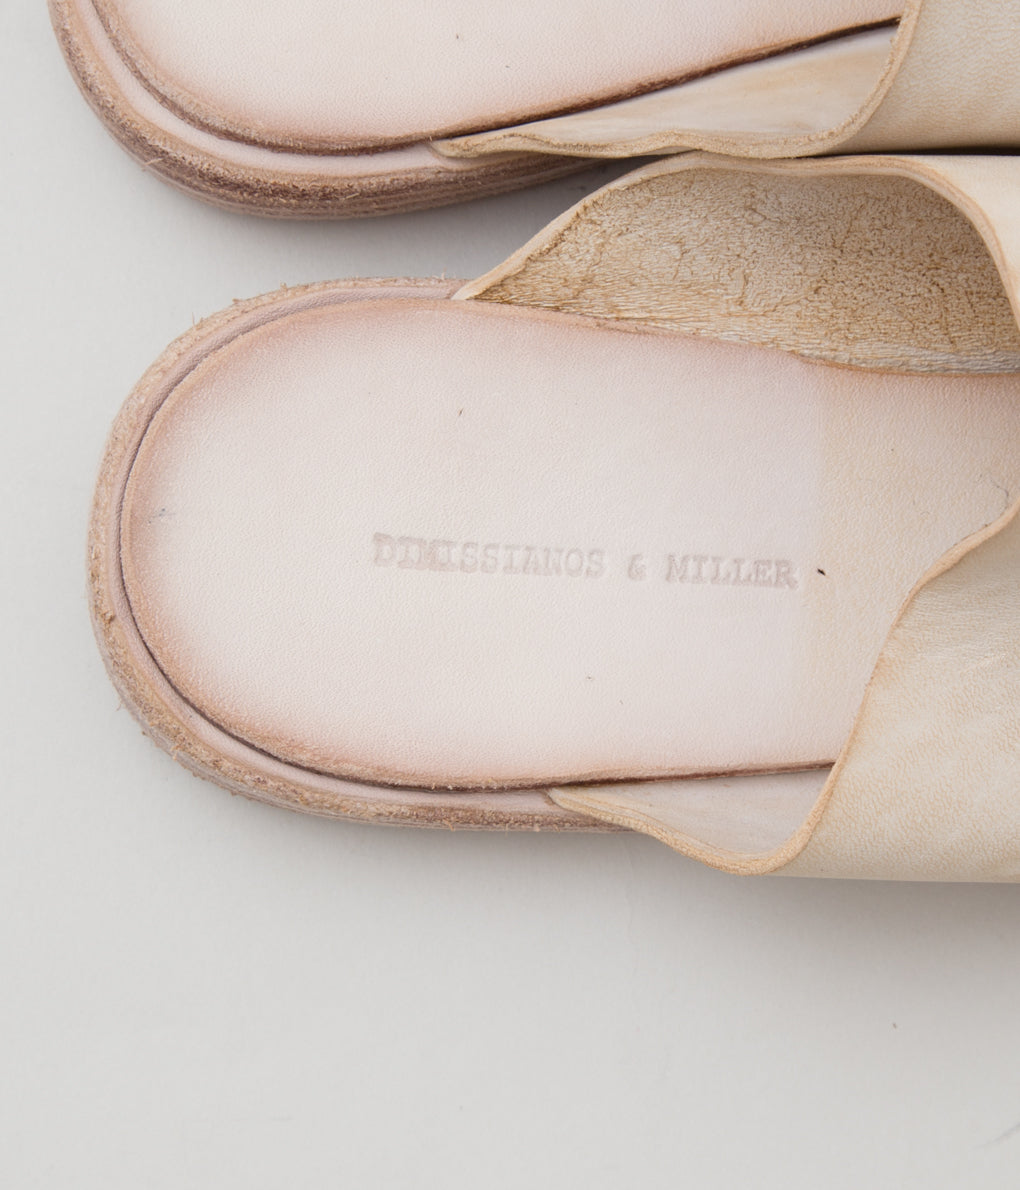 DIMISSIANOS & MILLER "MULE W CLOSED TOES"(NATURAL)